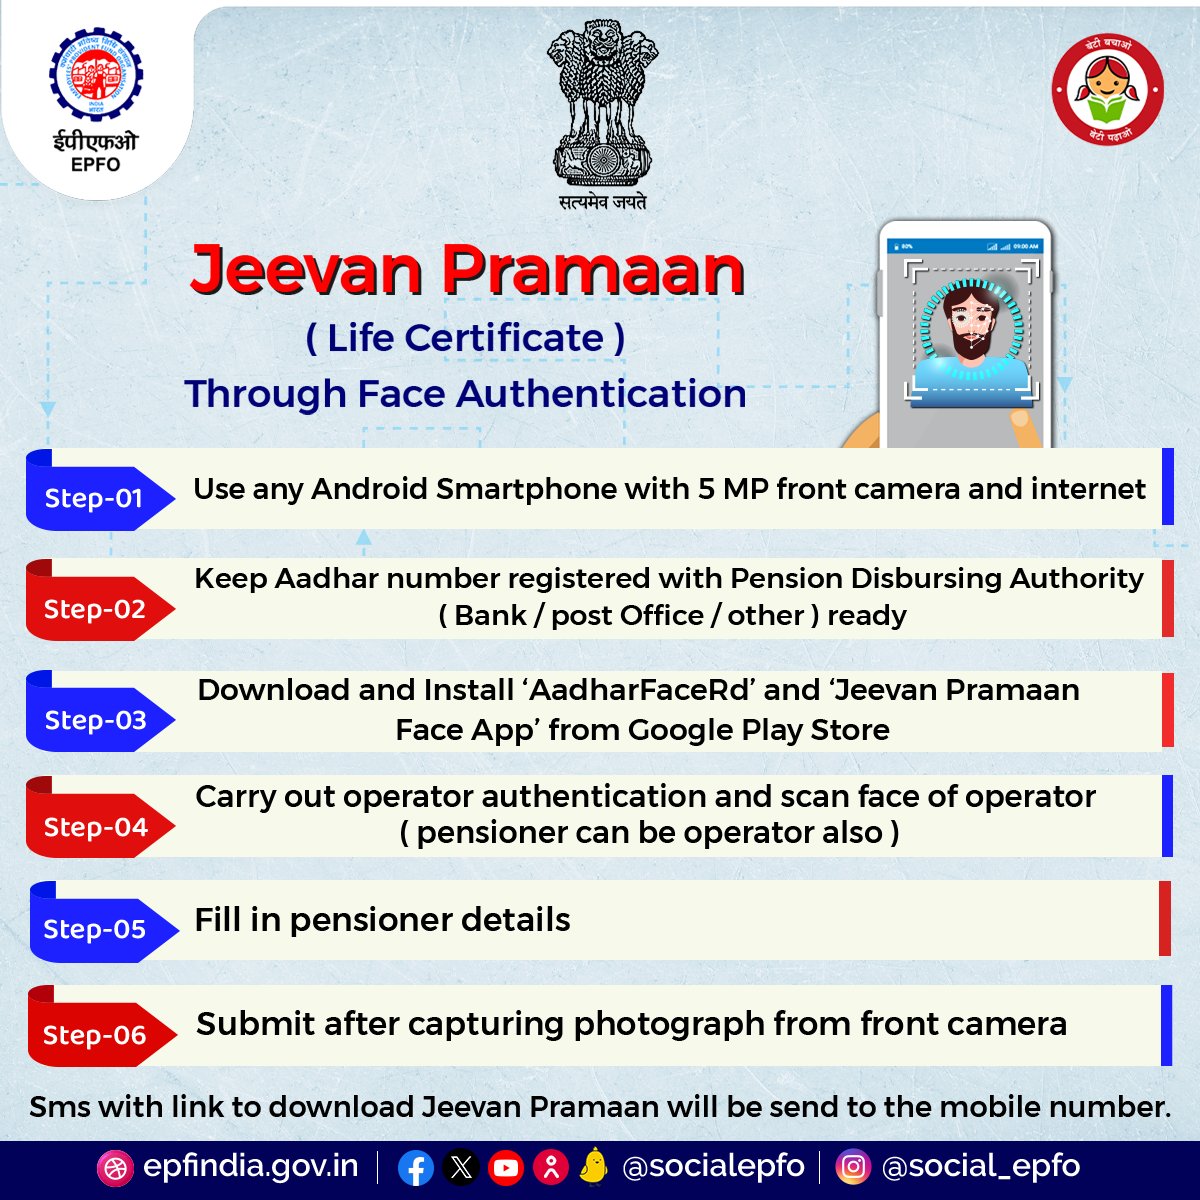 Is your life certificate expiring soon?
Don't worry. Submit it digitally sitting at home anytime in a few easy steps.

#DigitalServices #LifeCertificate #JeevanPramaan #Pensioners #EPFO #EPF #EPS #HumHaiNa #EPFOwithYou #पीएफ #ईपीएफ #ईपीएफओ